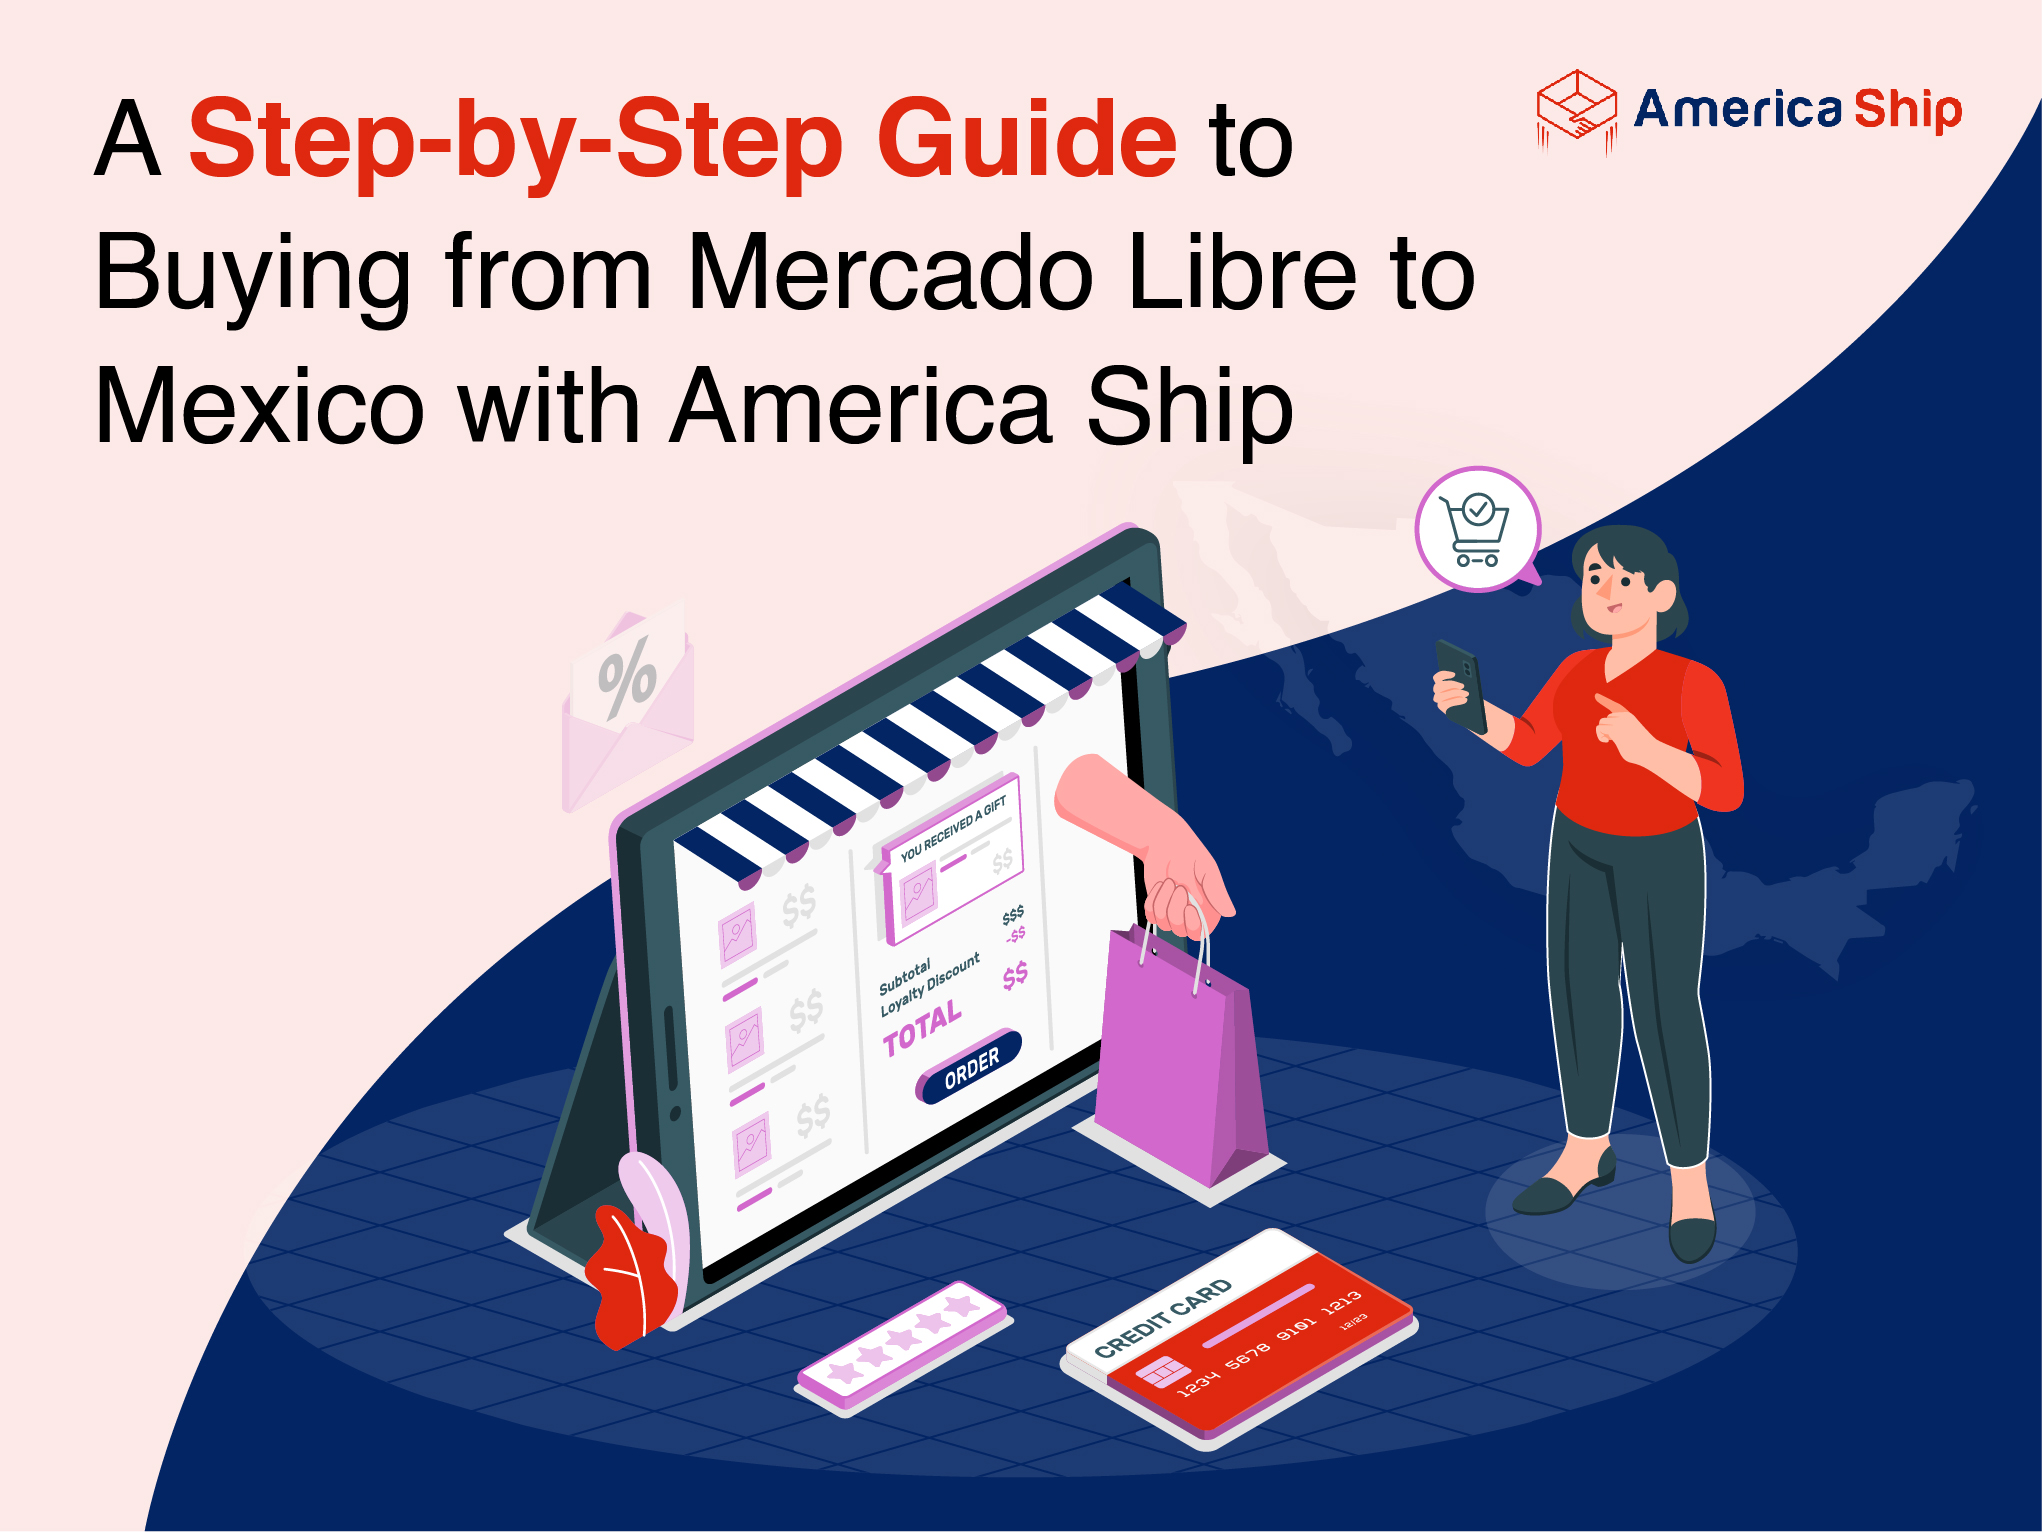 A Step-by-Step Guide to Buying from Mercado Libre to Mexico with America Ship